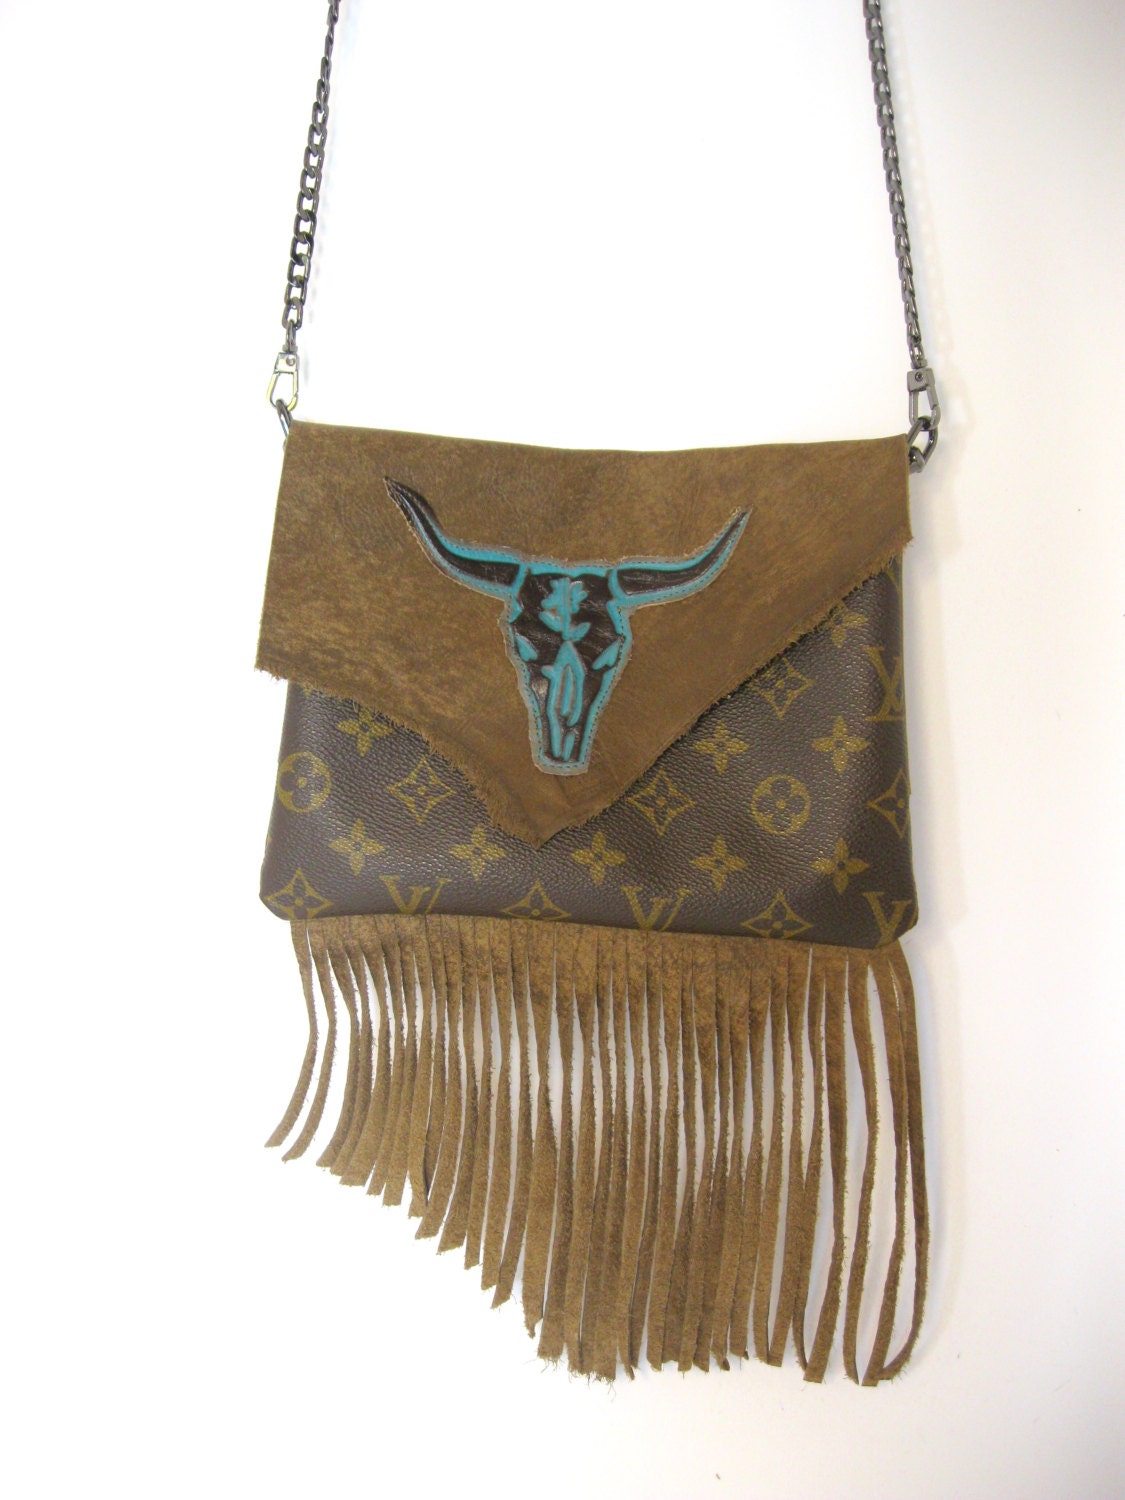 Louis Vuitton Upcycled Crossbody Bag Western by ThePalmBeachCloset